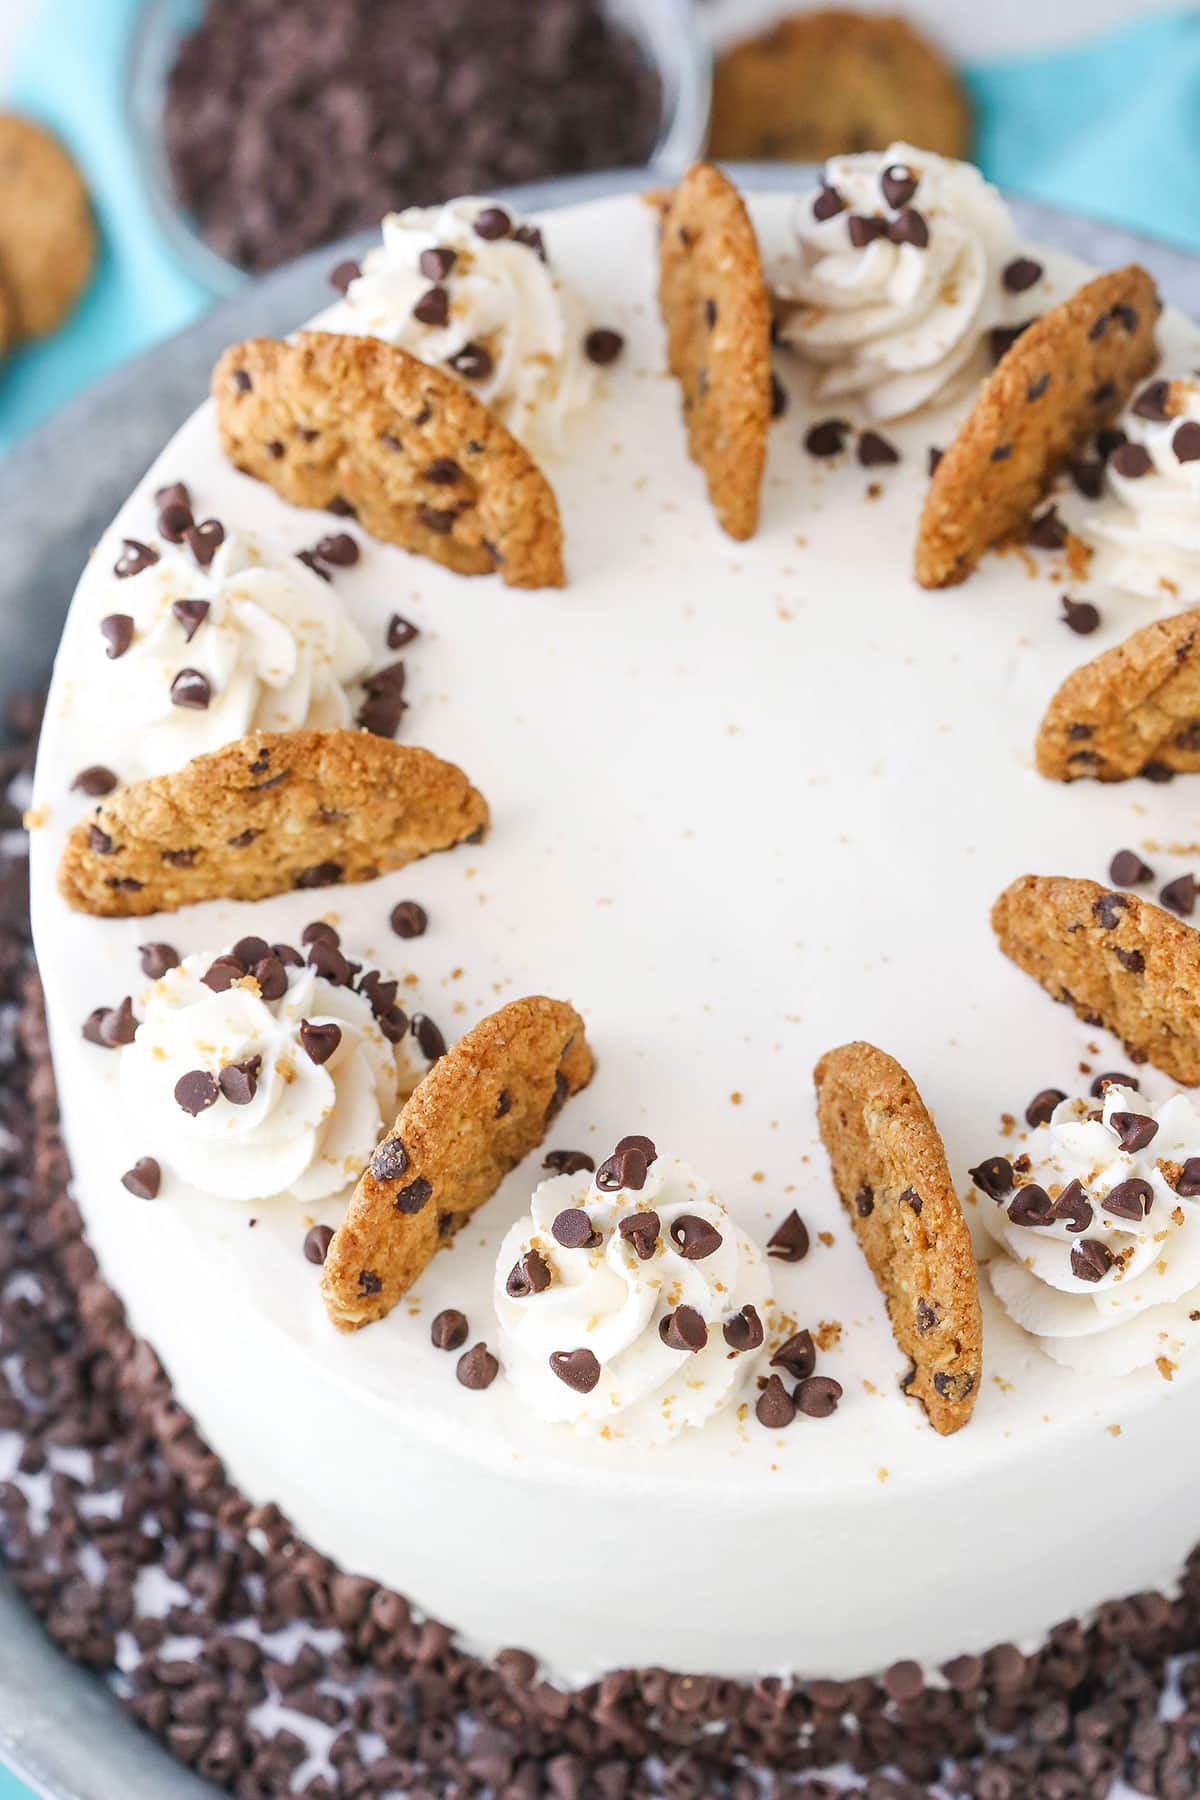 Overhead view of an oatmeal chocolate chip cookie ice cream cake.